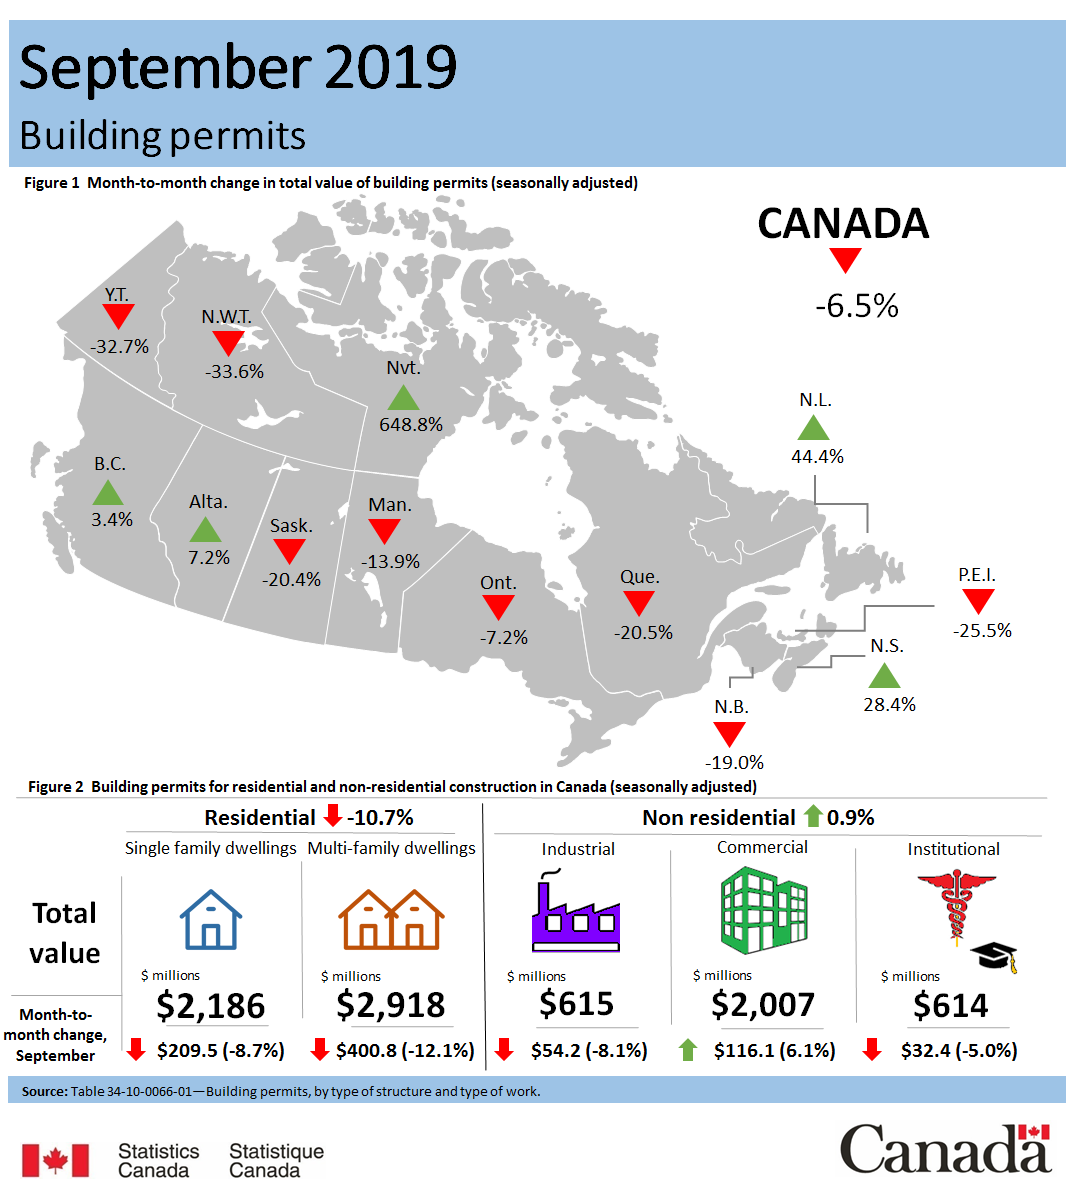 Thumbnail for Infographic 1: Building permits, September 2019